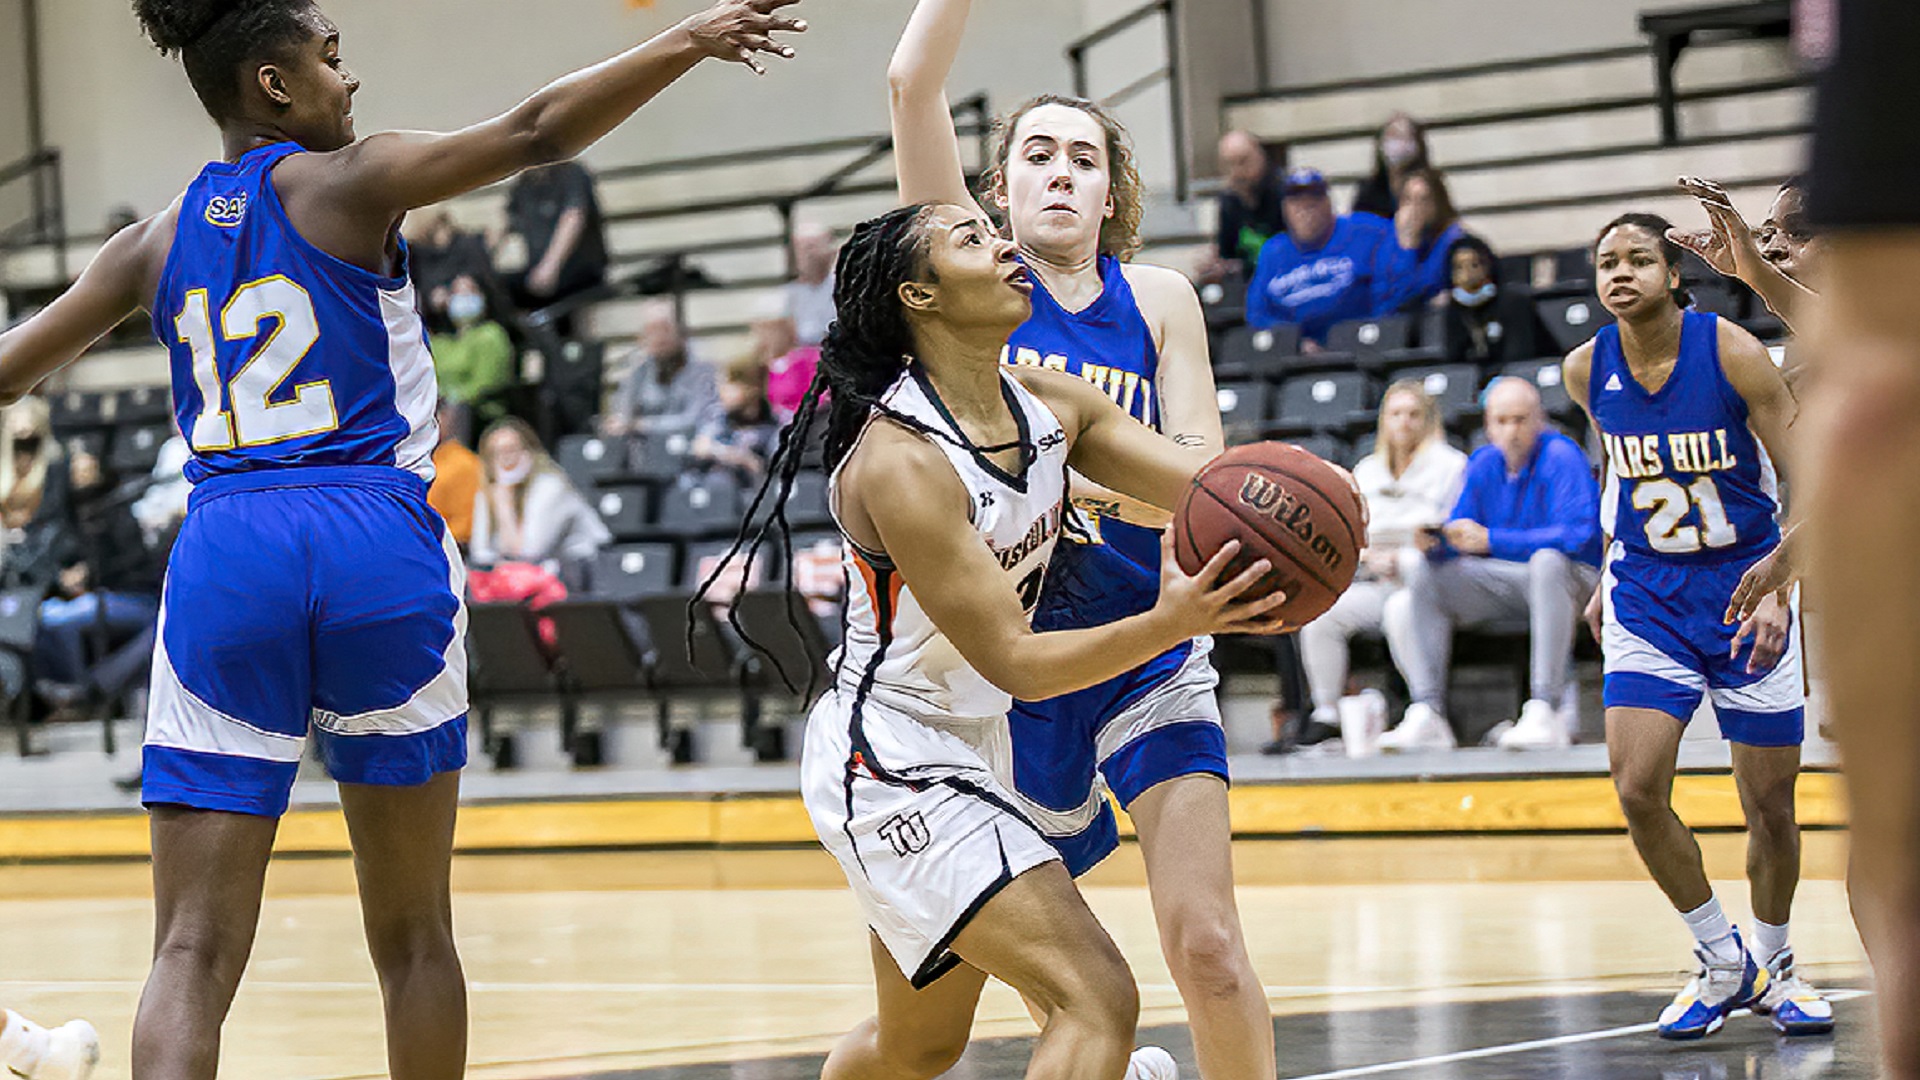 Jalia Arnwine scored a game-high 18 points for the Pioneers against Mars Hill (photo by Chuck Williams)